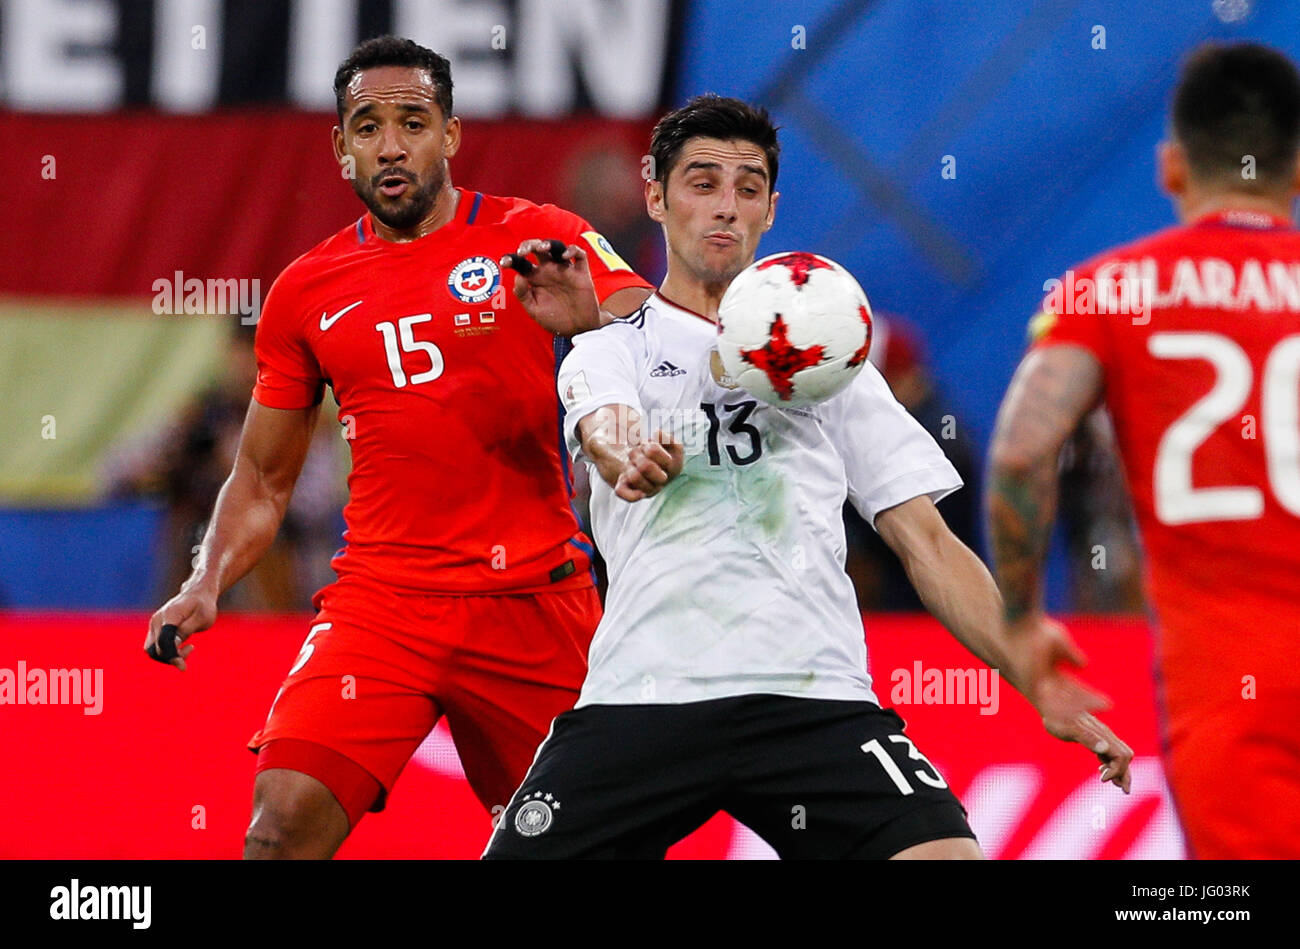 St Petersburg, Russia. 2nd July, 2017. CHILE VS GERMANY - BEAUSEJOUR Jean of Chile plays ball with STINDL Lars of Germany during a match between Chile and Germany at the final of the Confederations Cup 2017 on Sunday (2), held at the Krestovsky Stadium (Zenit Arena) in St. Petersburg, Russia. (Photo: Marcelo Machado de Melo/Fotoarena/Alamy Live News) Stock Photo